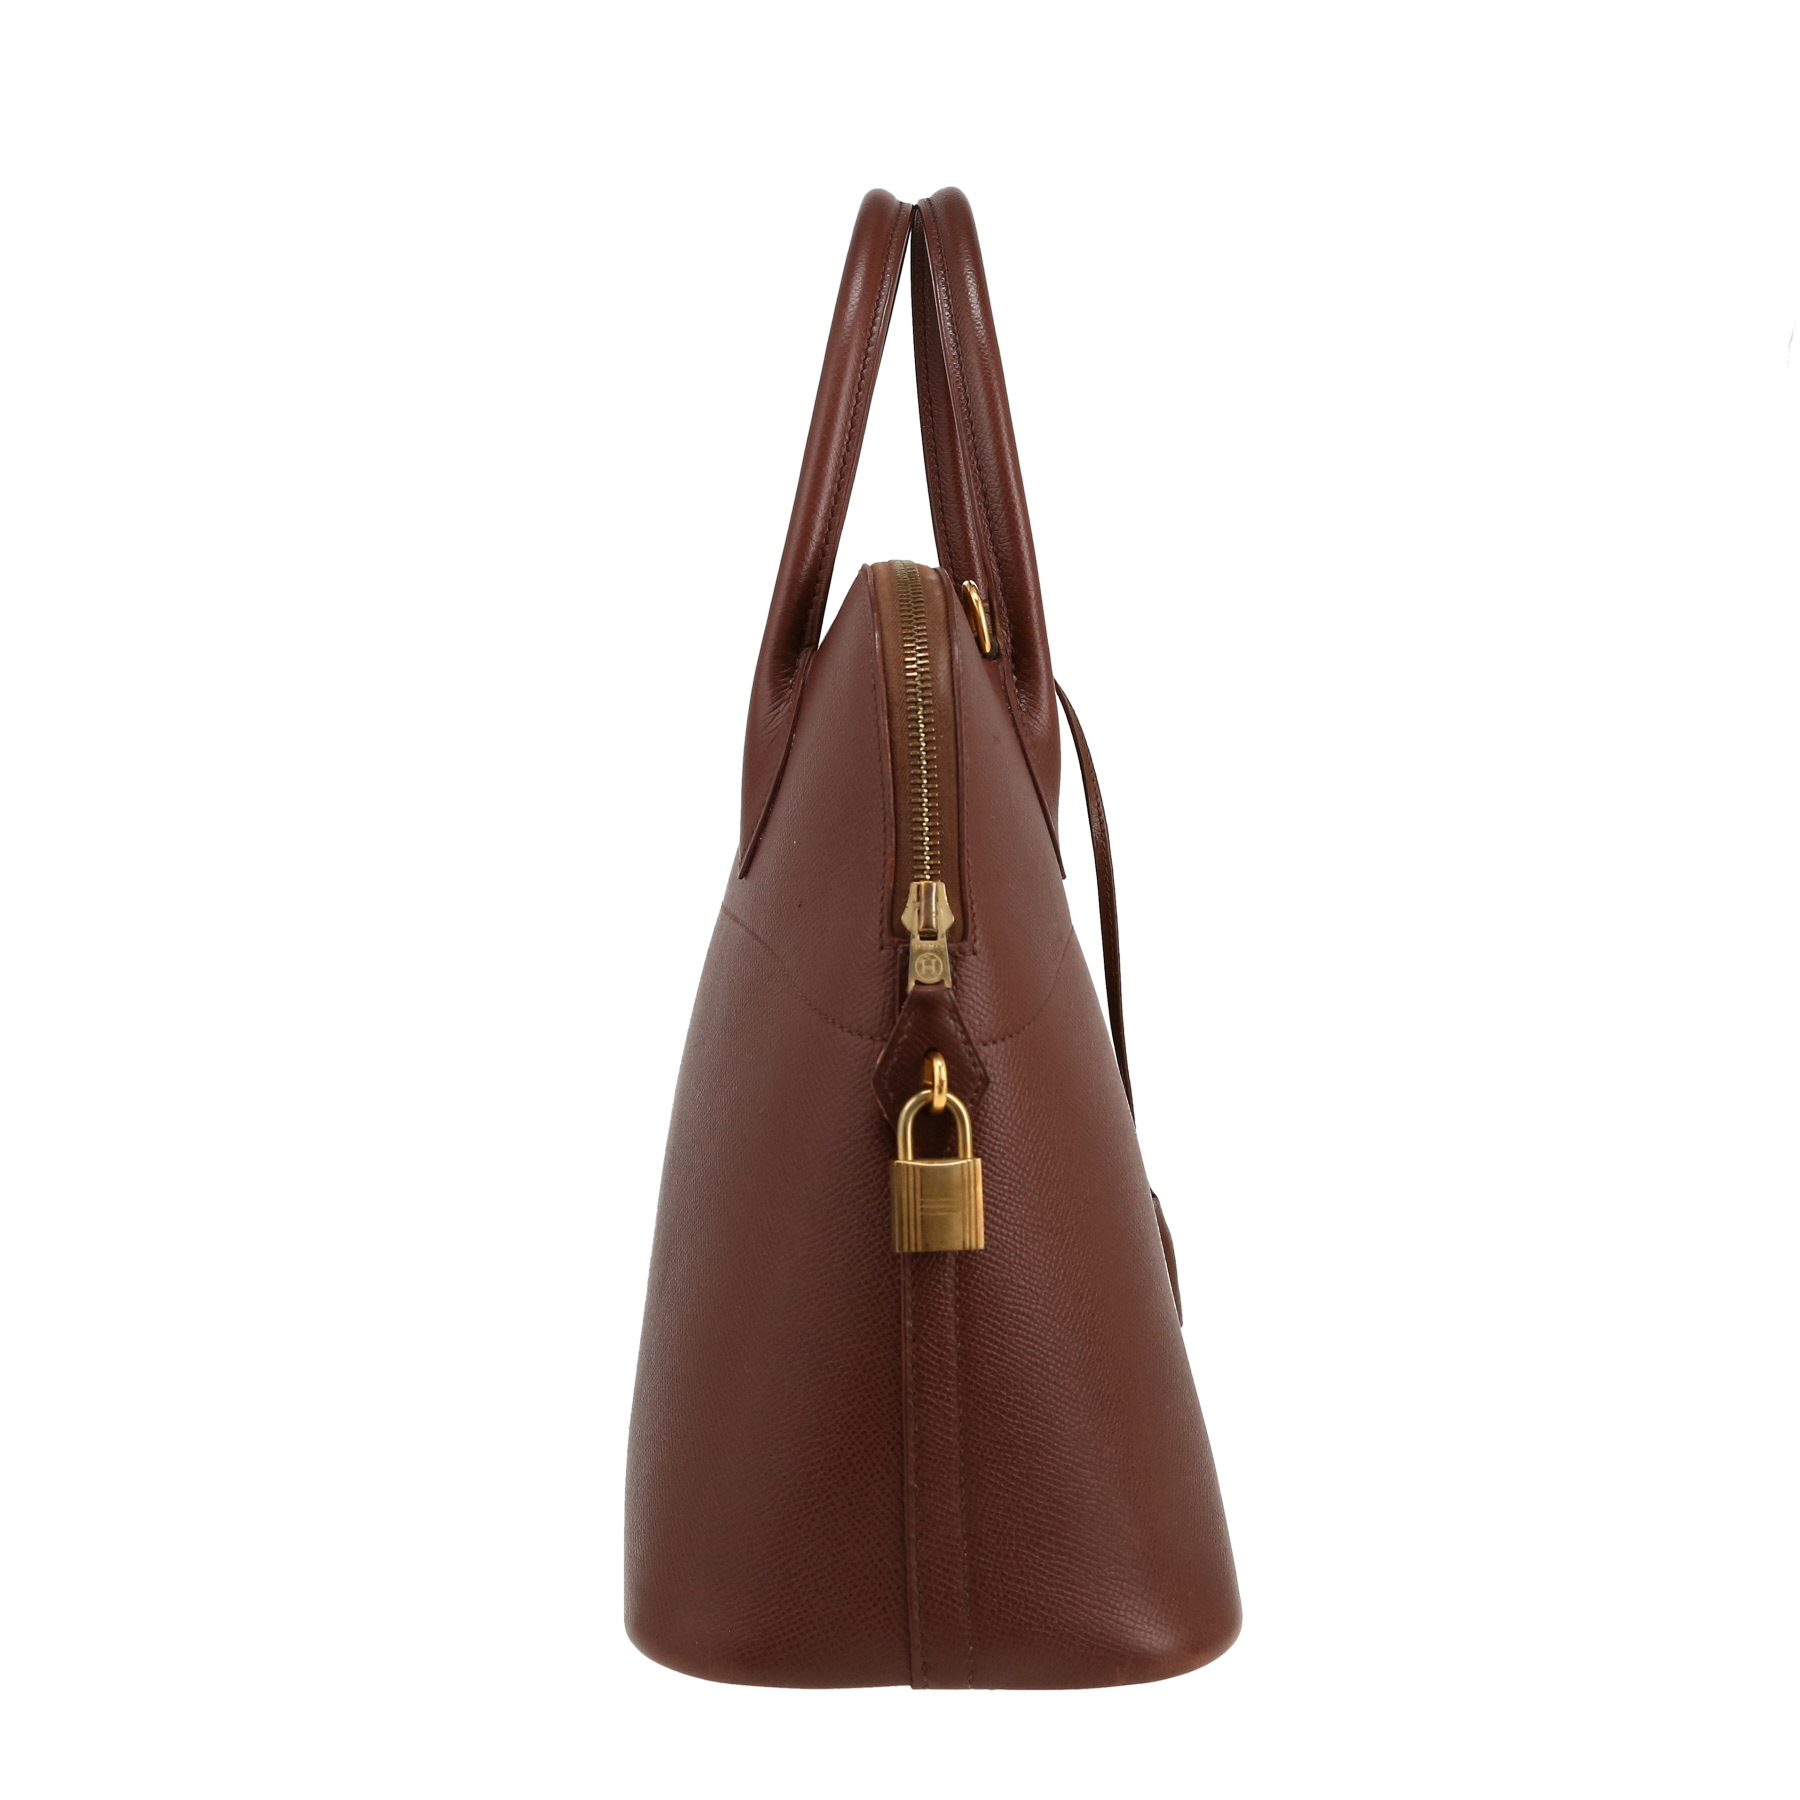 Bolide 35 cm Handbag In Brown Courchevel Leather